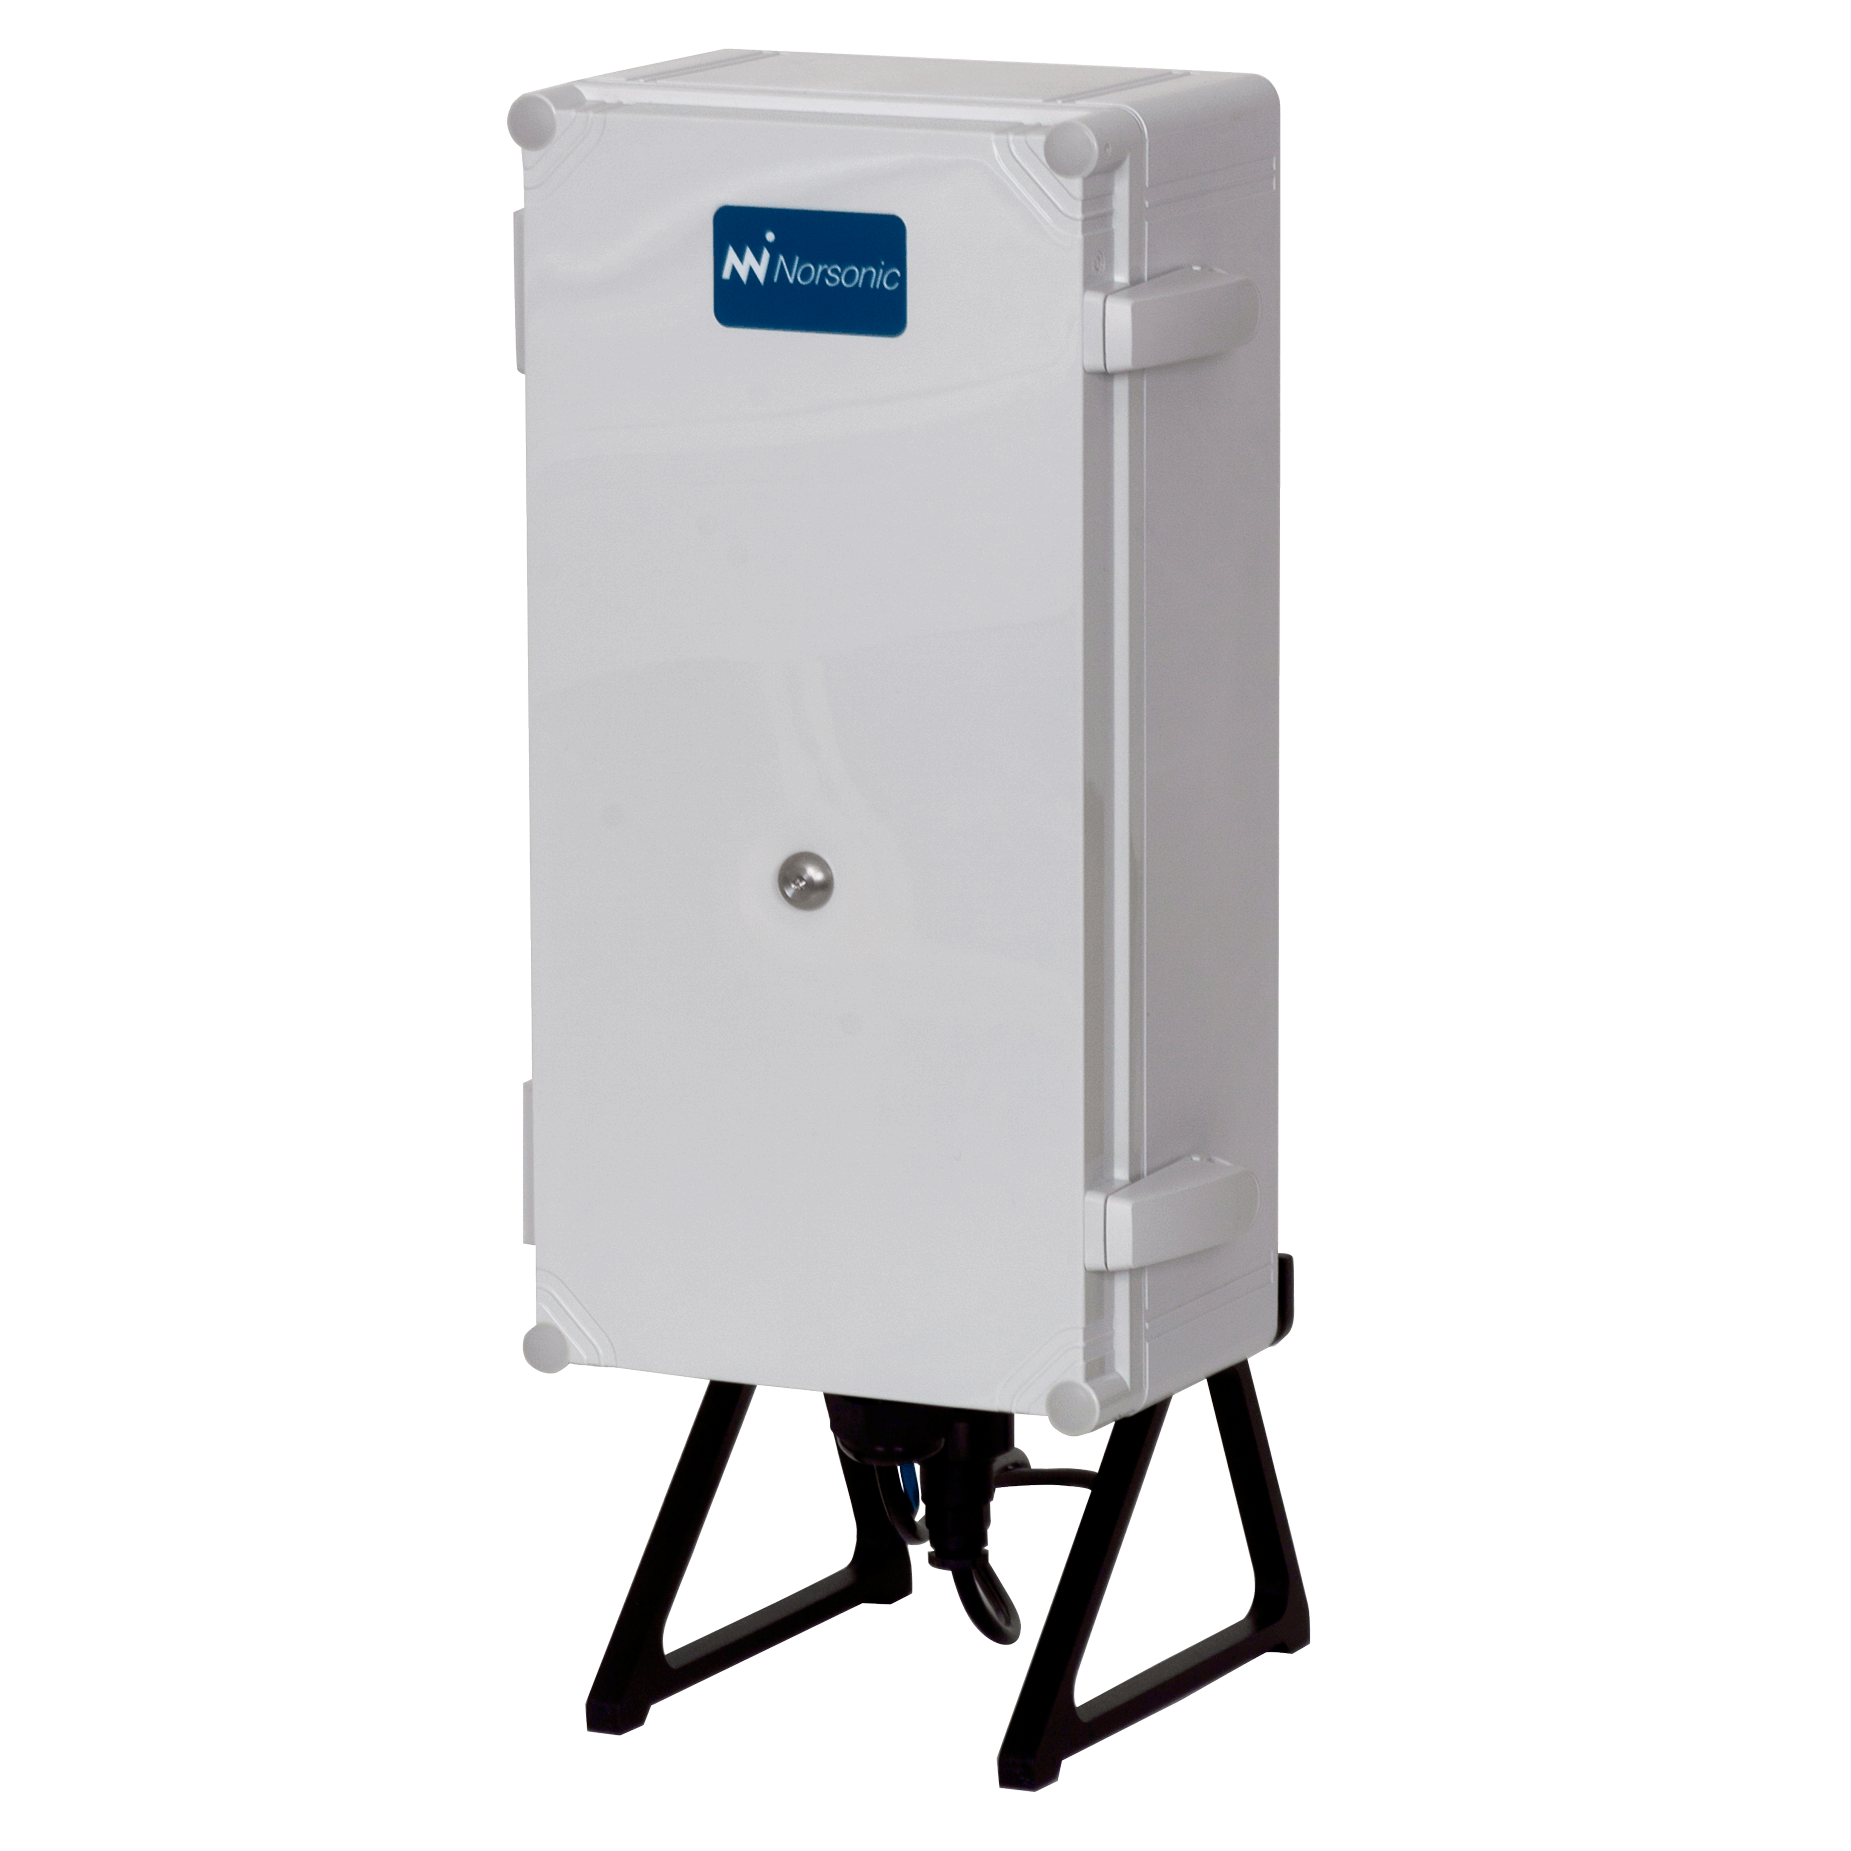 Norsonic Nor1545 weatherproof cabinet for Nor145 with mains input.